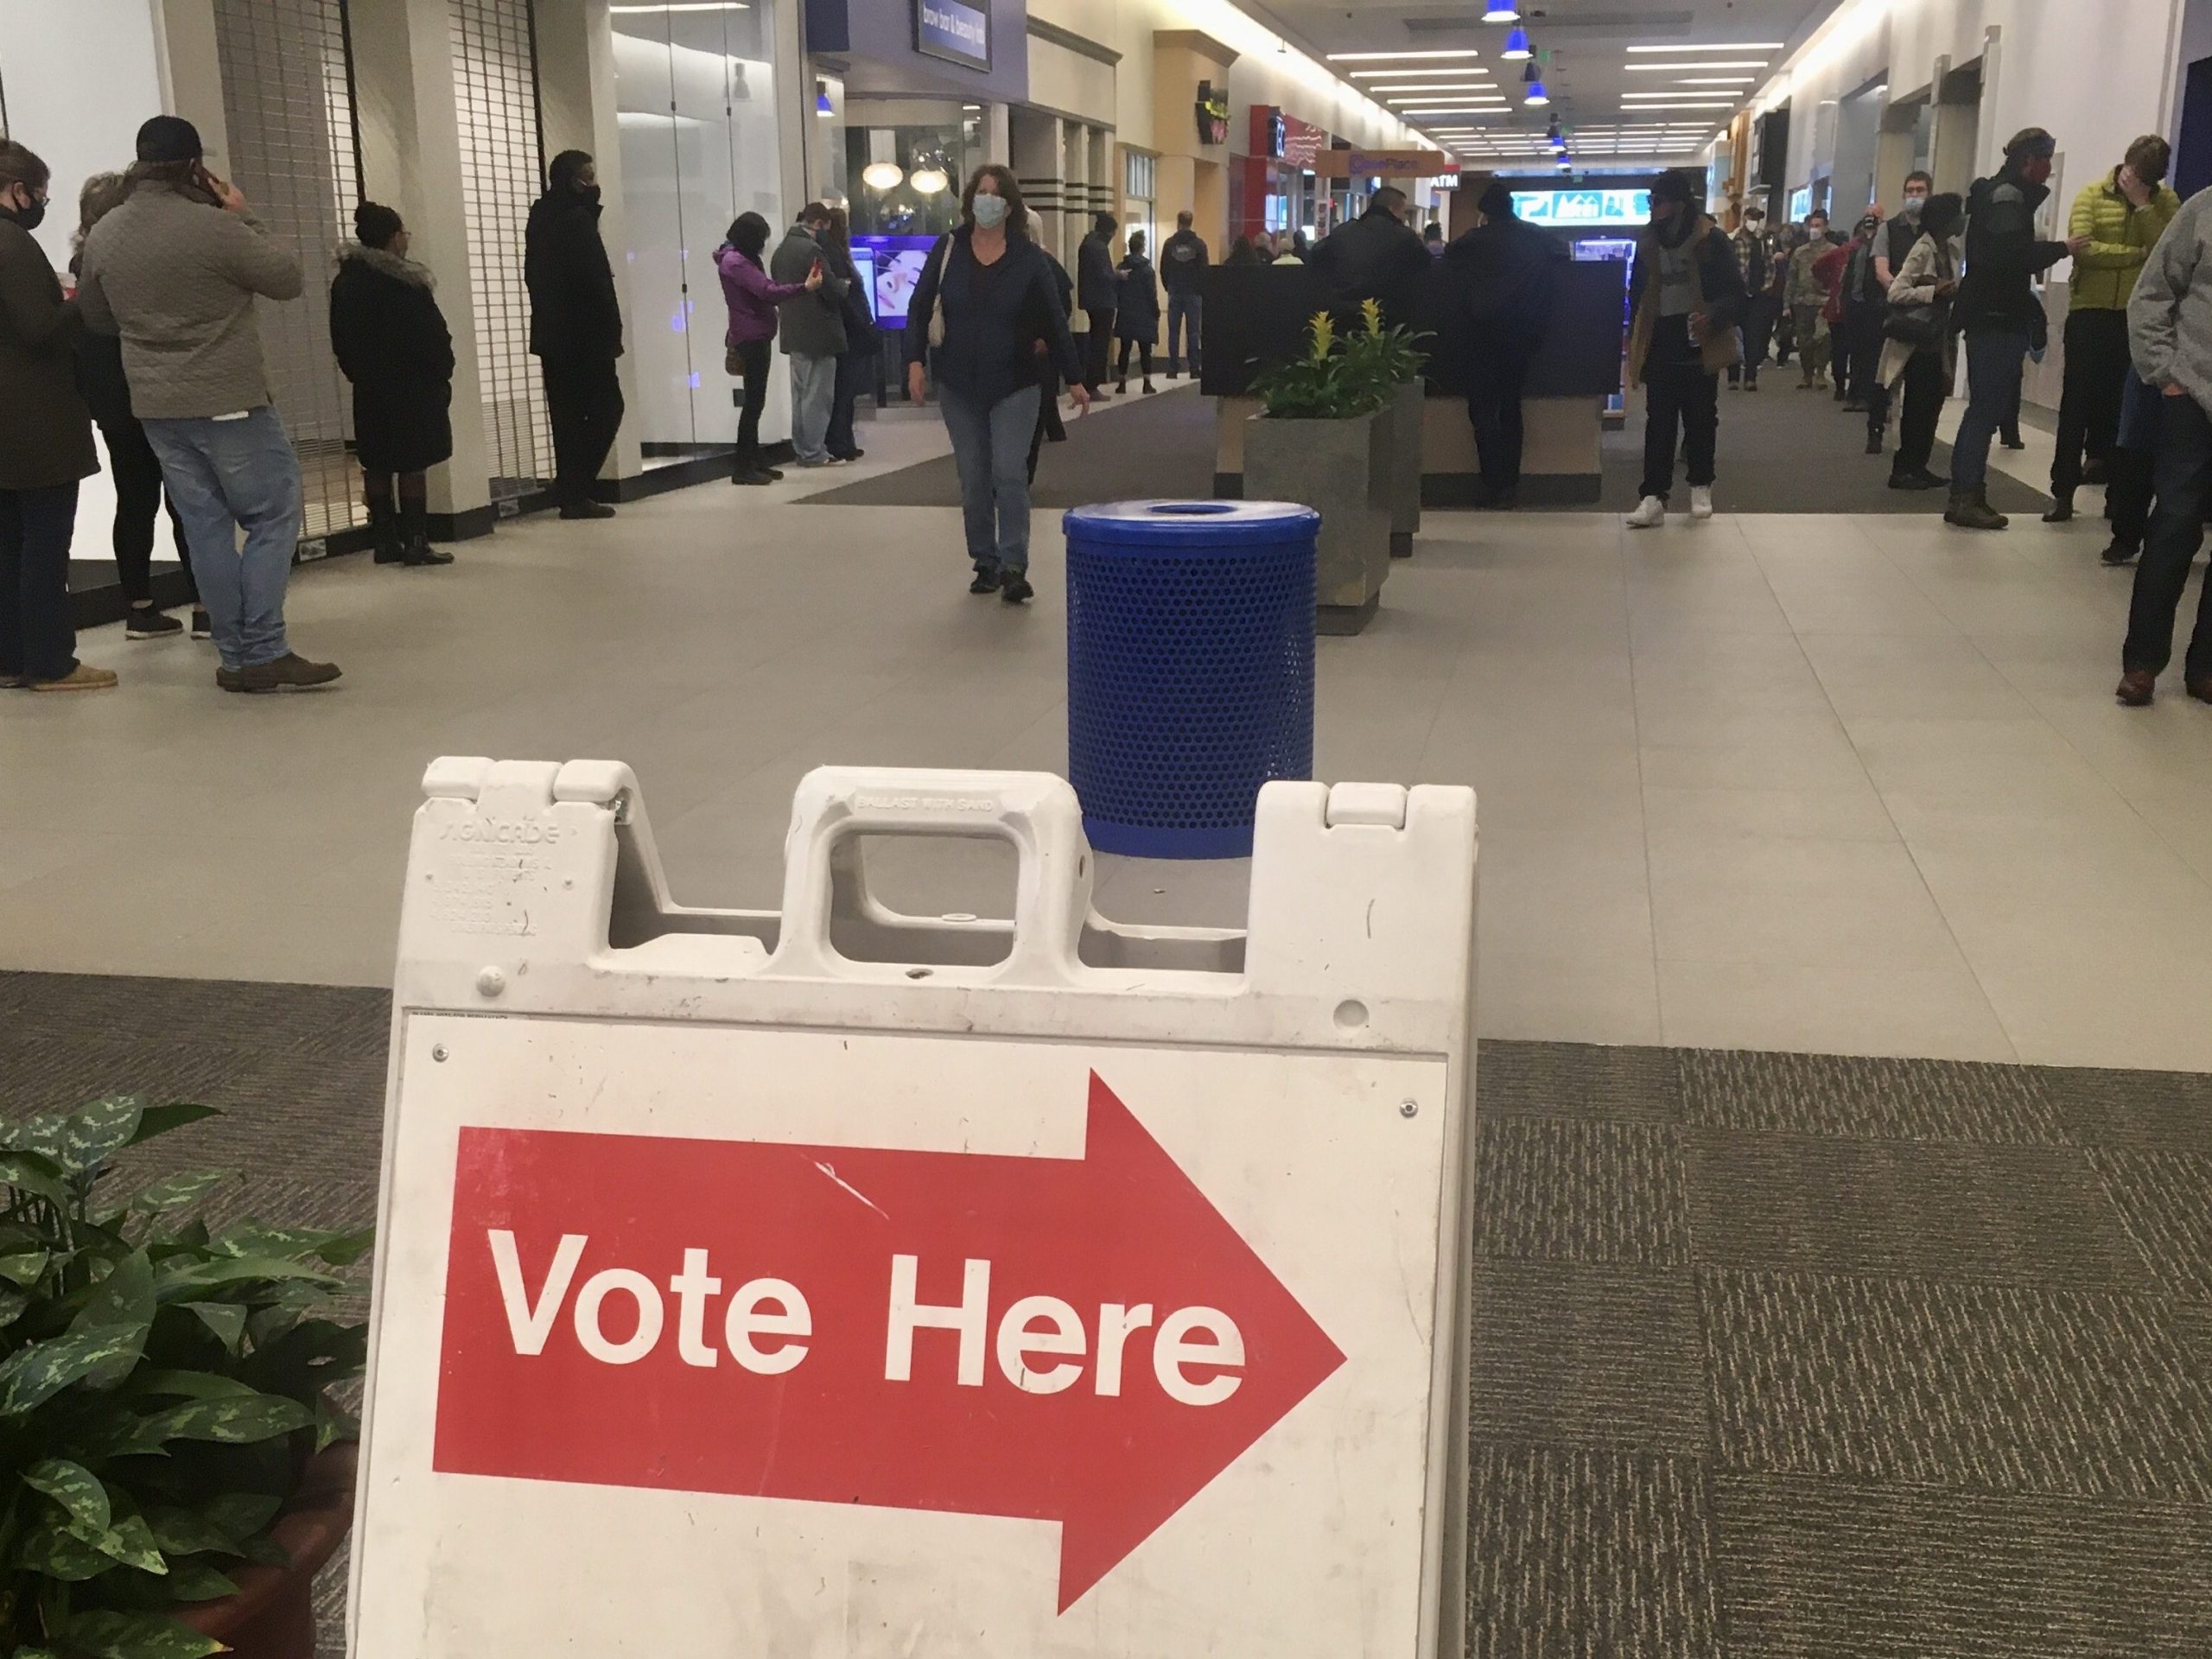 A sign in the foreground says "vote here polling place". on both sides is a long line of people.